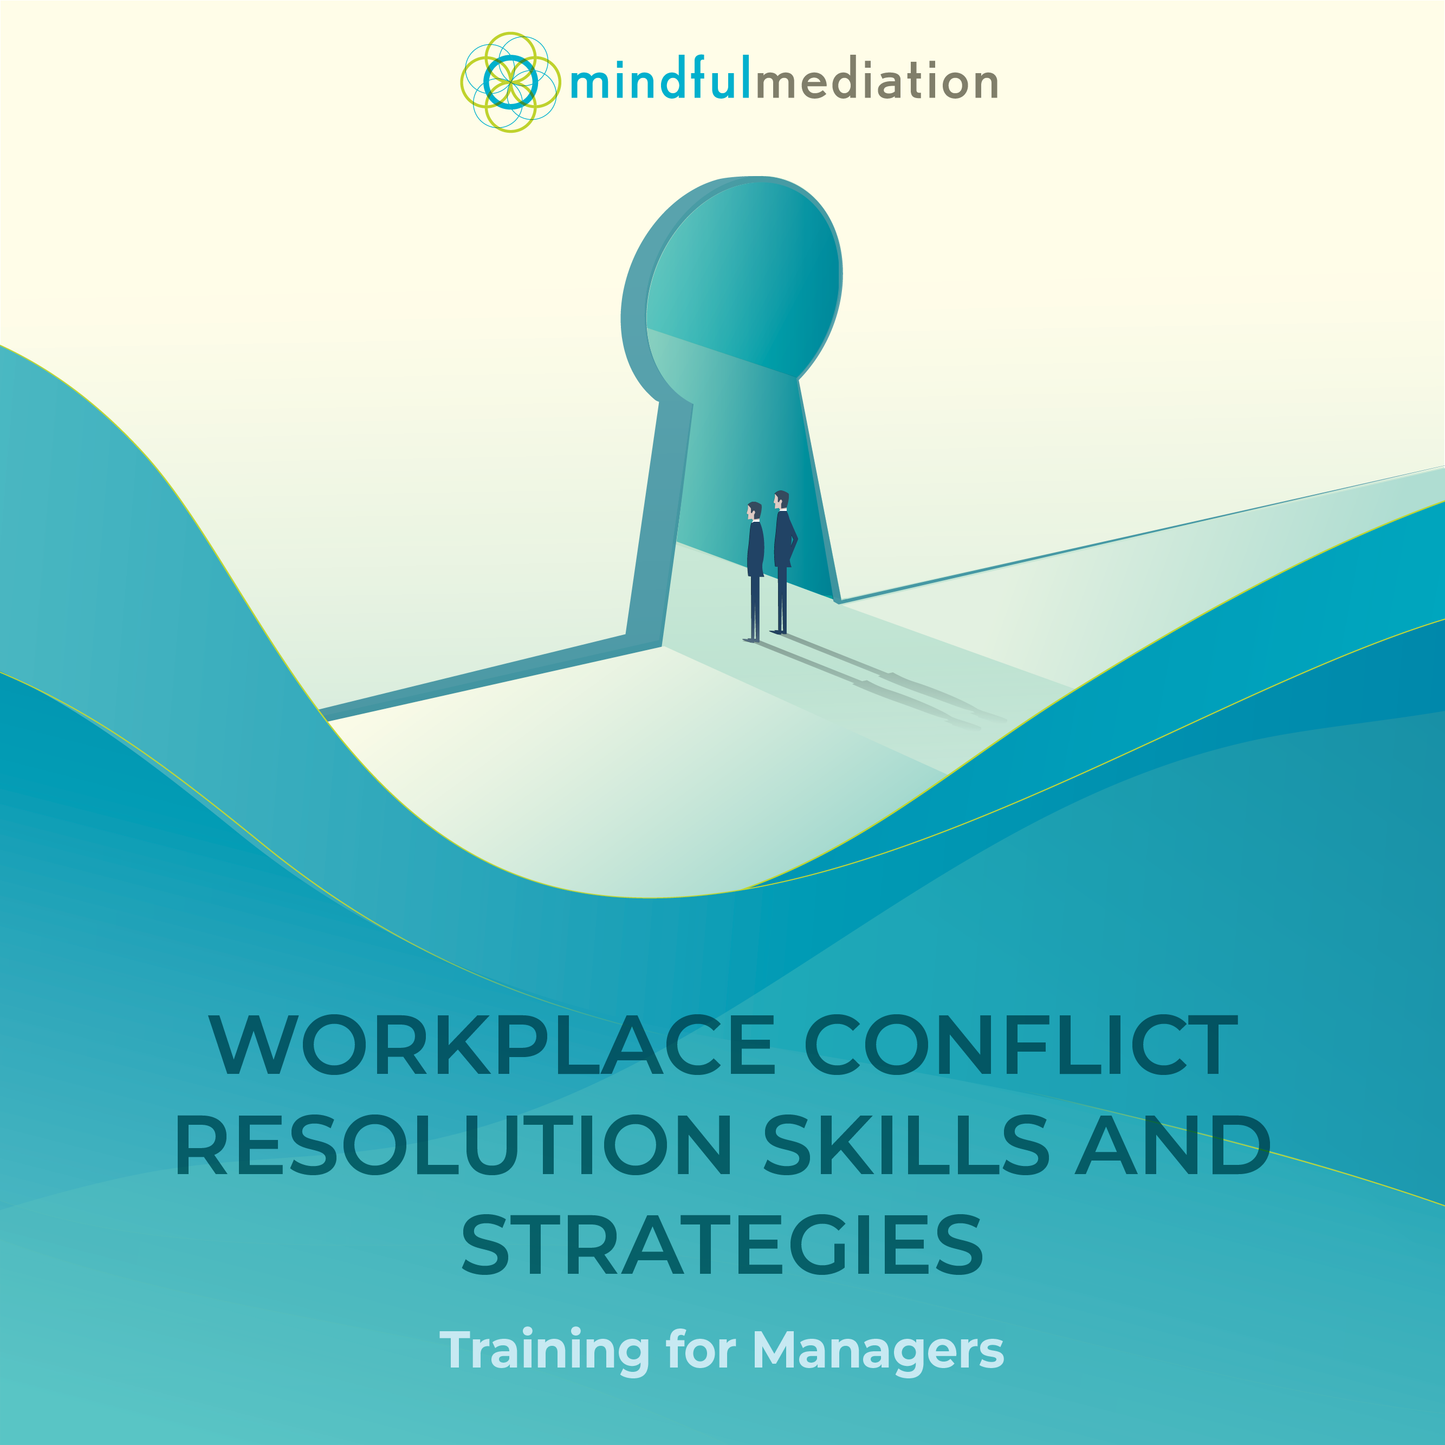 Workplace Conflict Resolution Skills and Strategies for Managers